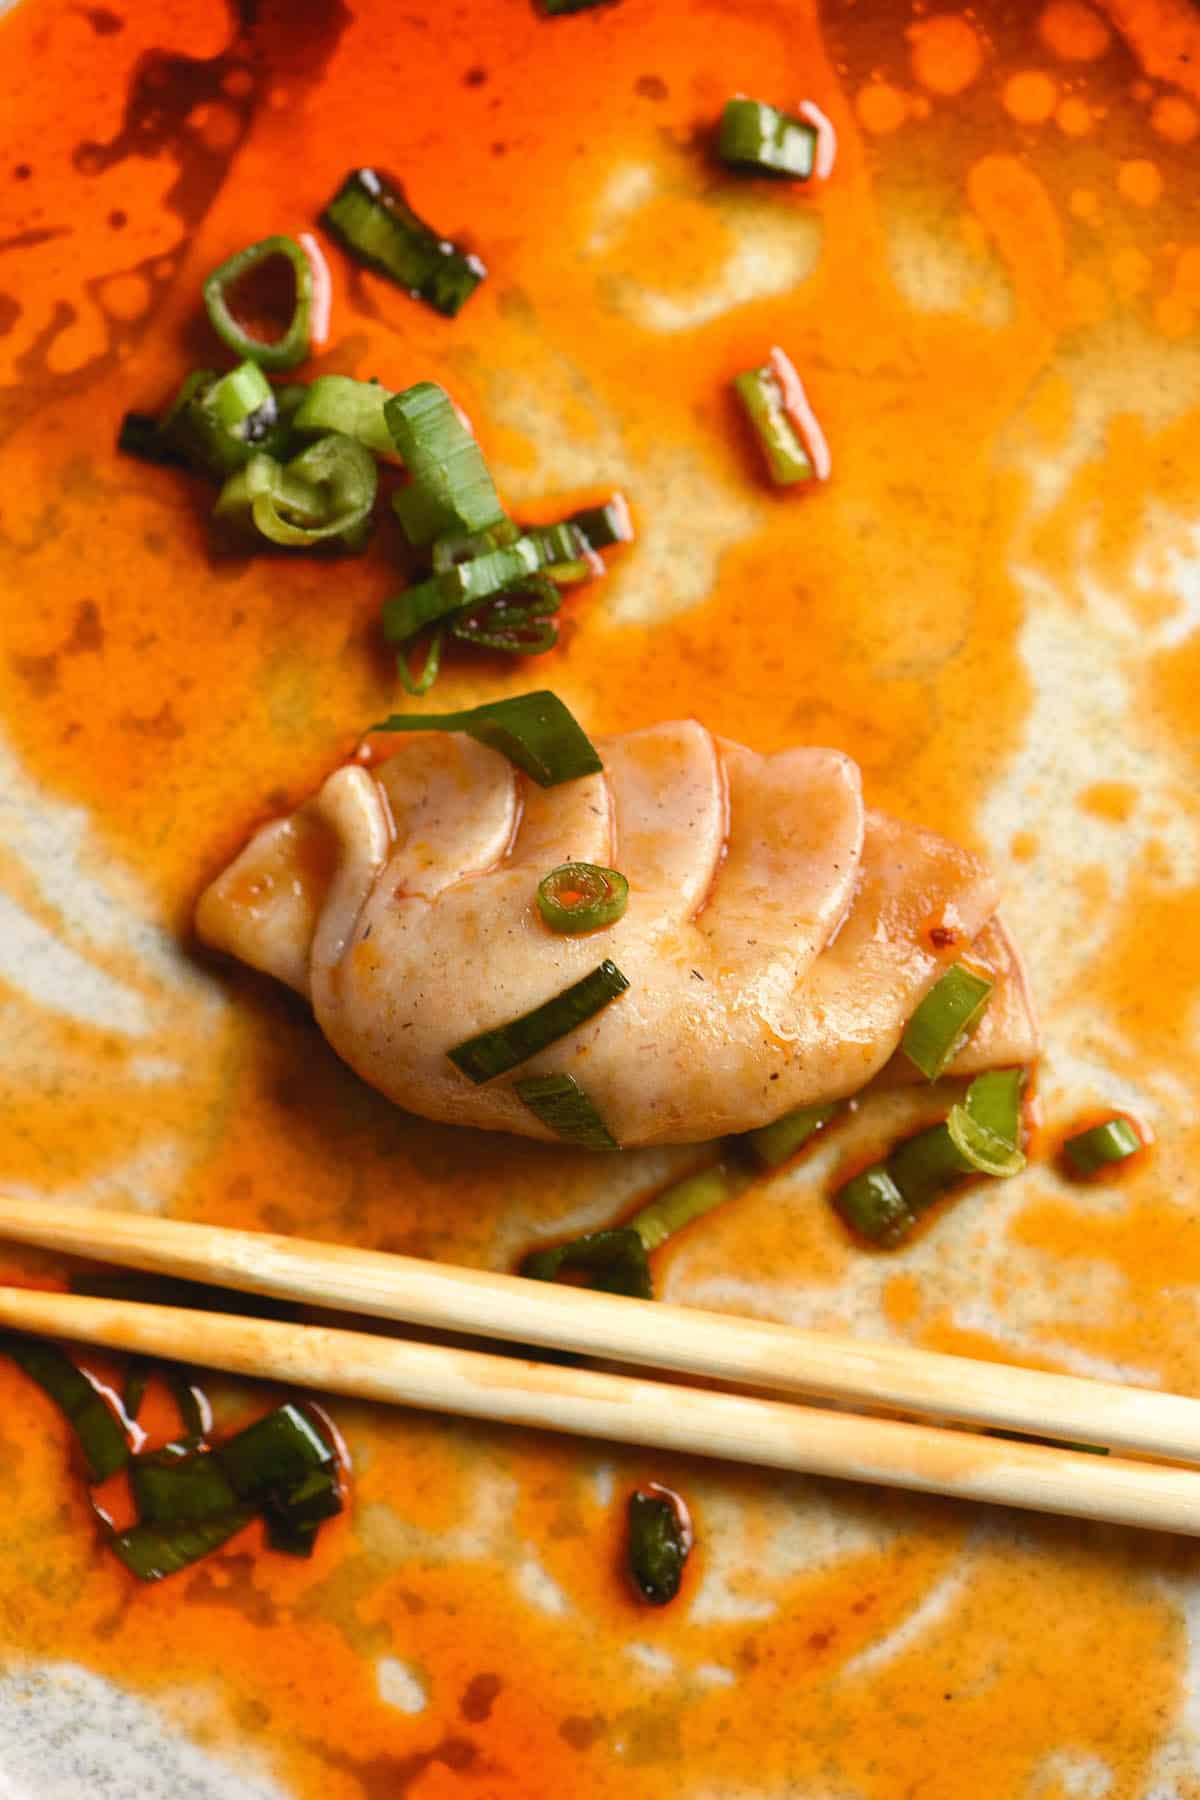 A close up image of a pleated gluten free dumpling smothered in chill oil on a white plate. Chopsticks sit underneath the dumpling.